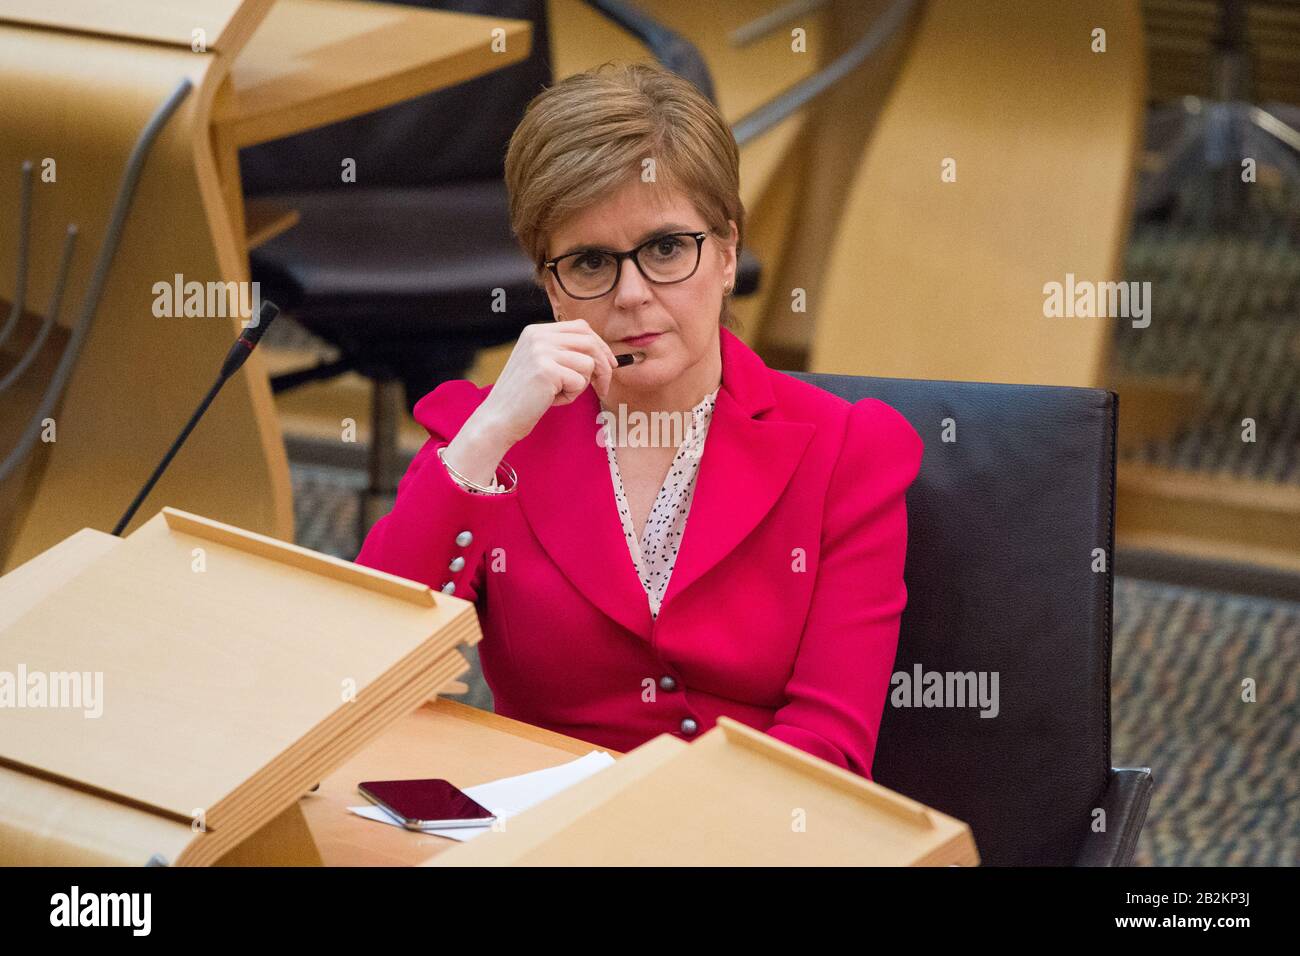 Edinburgh, UK. 3rd Mar, 2020. Pictured: Nicola Sturgeon MSP - First Minister of Scotland and Leader of the Scottish National Party (SNP). Ministerial Statement from Health Minister, Jeane Freeman MSP on the state of Coronovirus and Scotland's readiness to to mitigate the spread of the virus across Scotland. Scenes from the Scottish Parliament in Holyrood, Edinburgh. Credit: Colin Fisher/Alamy Live News Stock Photo